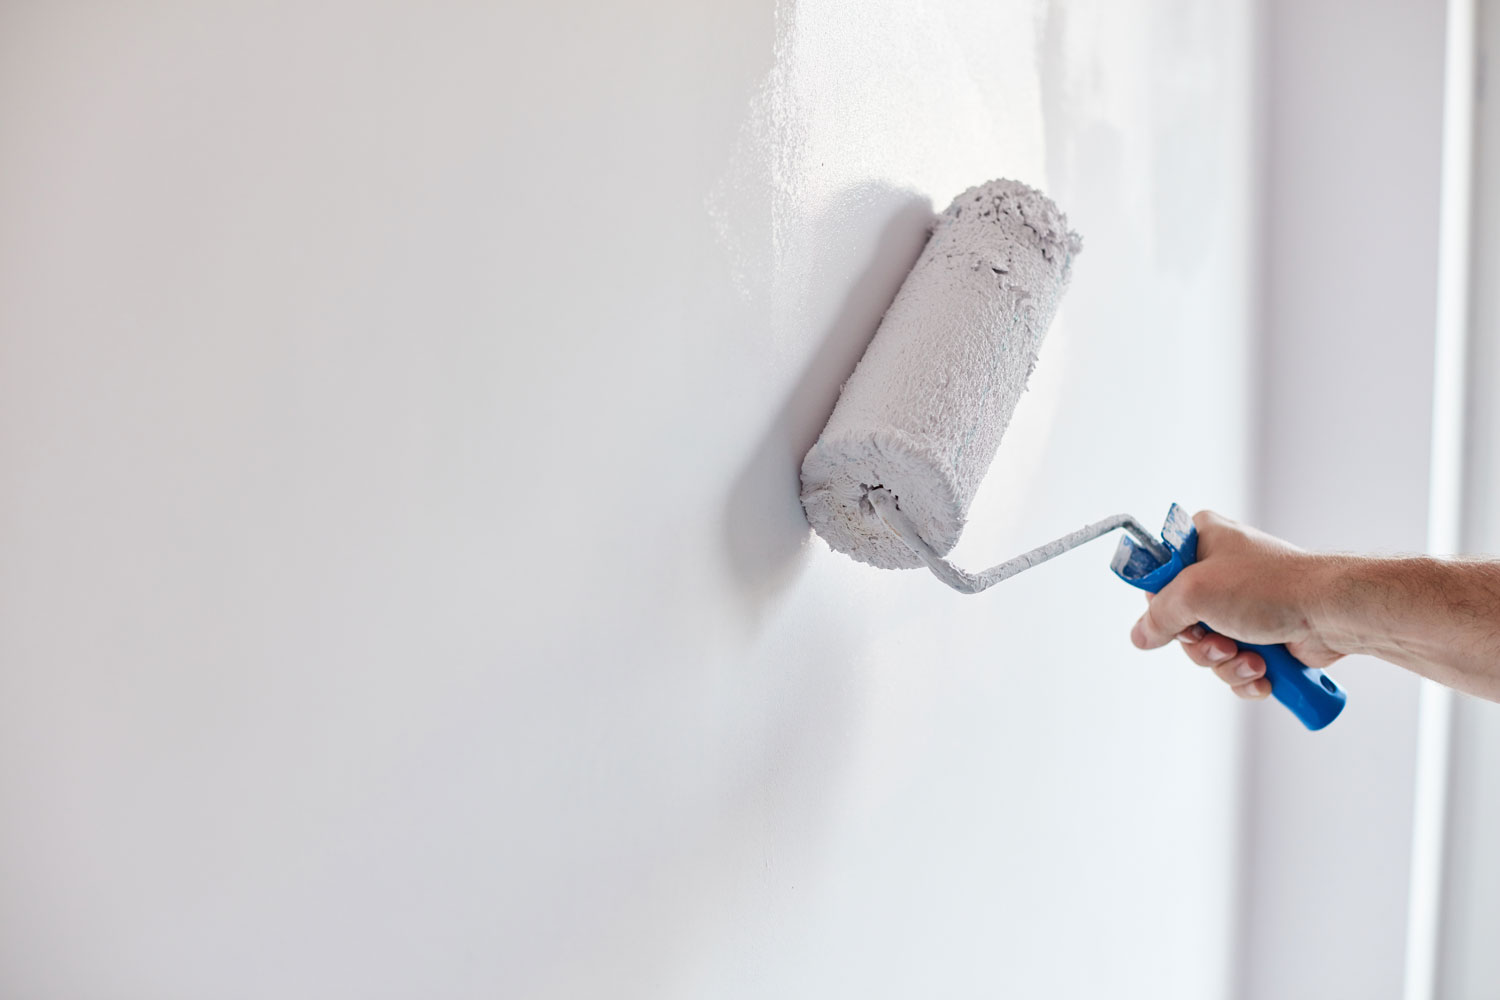 Painting the wall with white using a roller paint